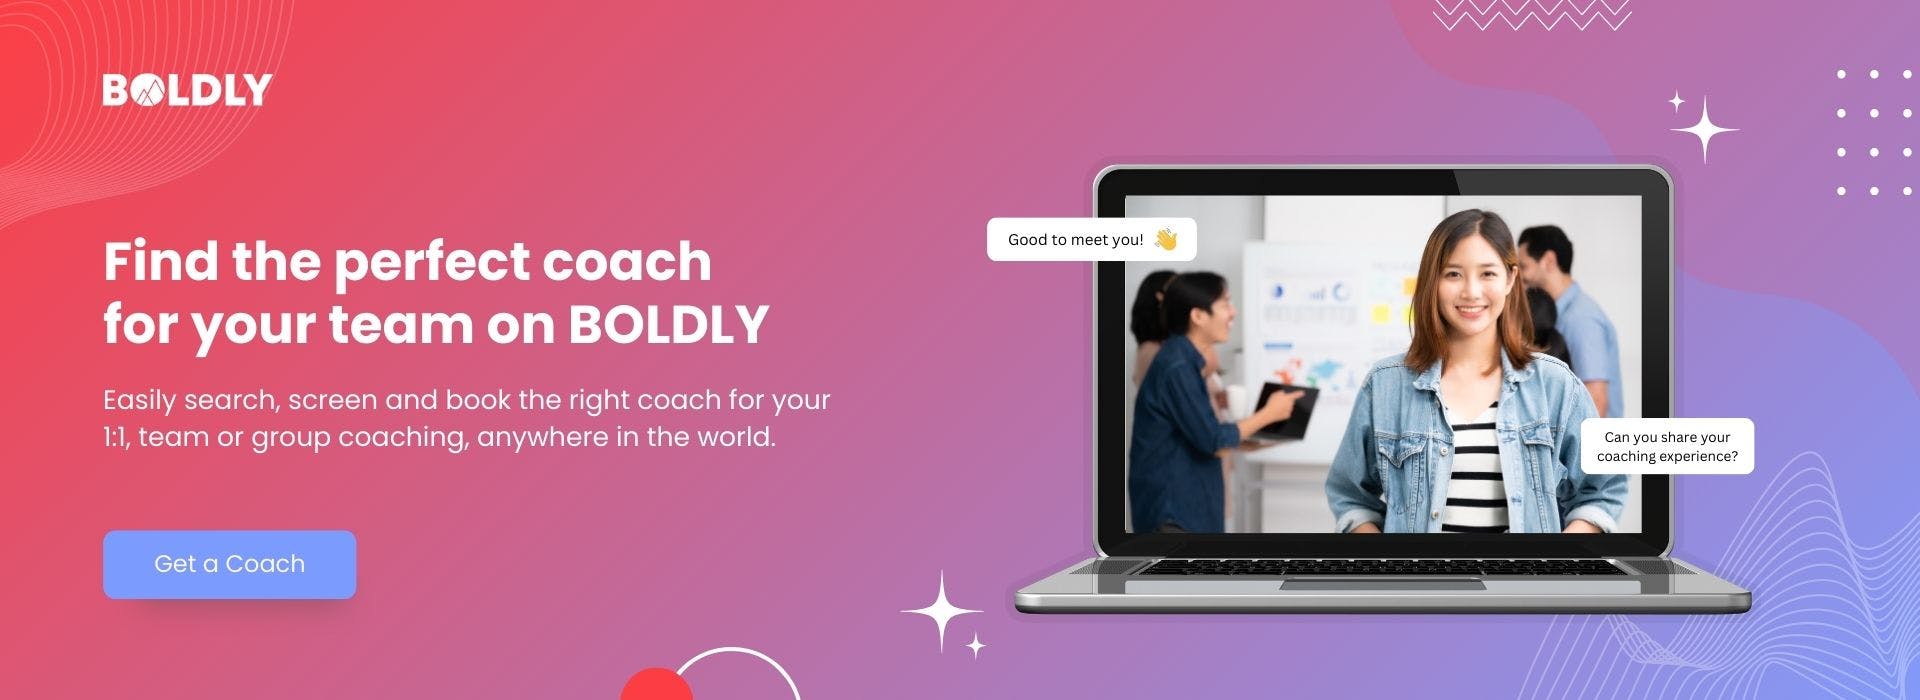 Find the perfect coach at BOLDLY